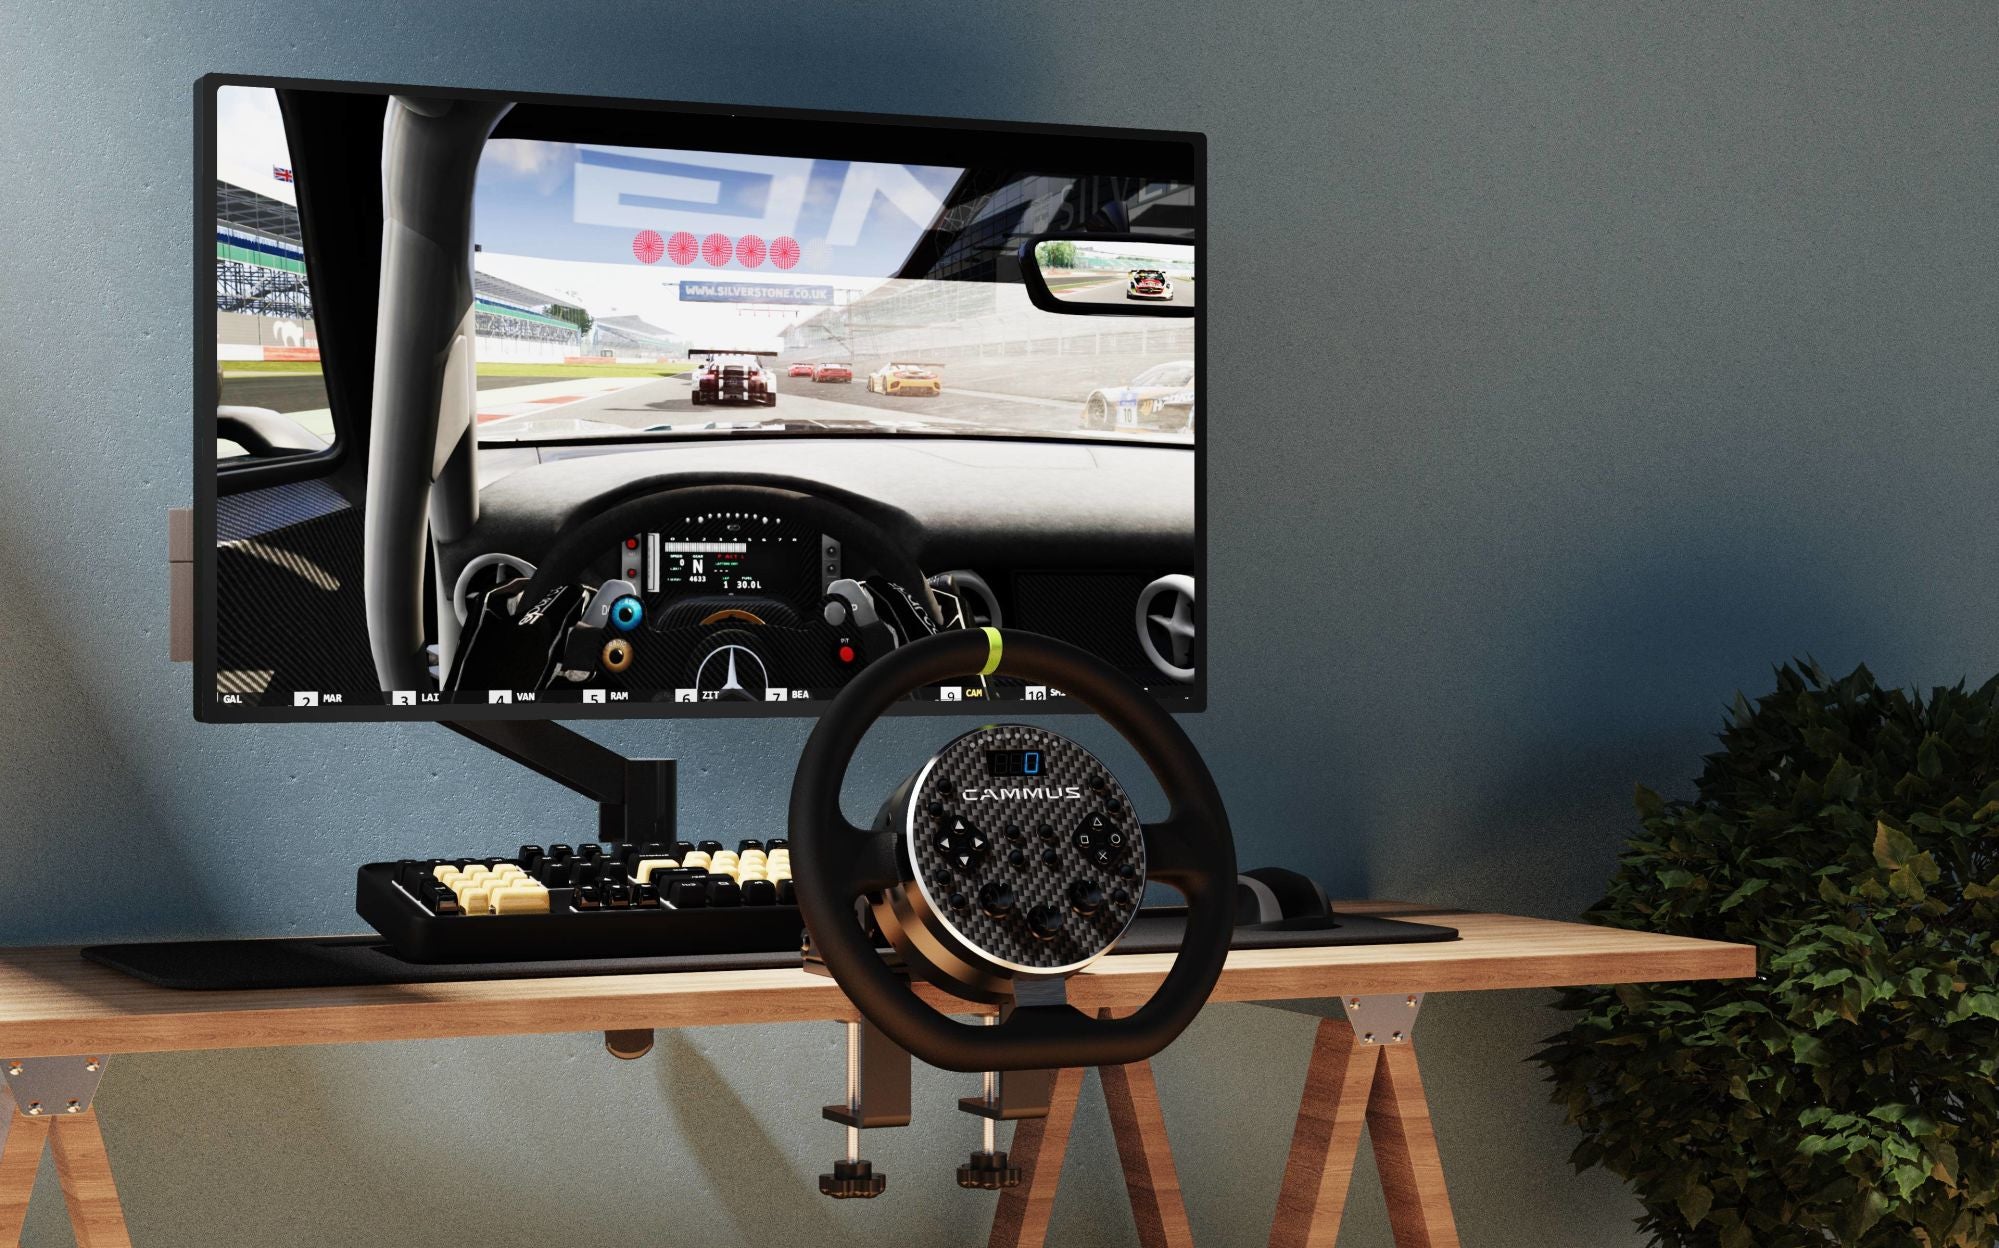 The CAMMUS C5 3IN1 Bundle With Table Clamp And Pedals Racing Wheel Direct Drive Base For PC Games is a 3IN1 Bundle that includes a controller and pedals, perfect for immersive racing experiences.